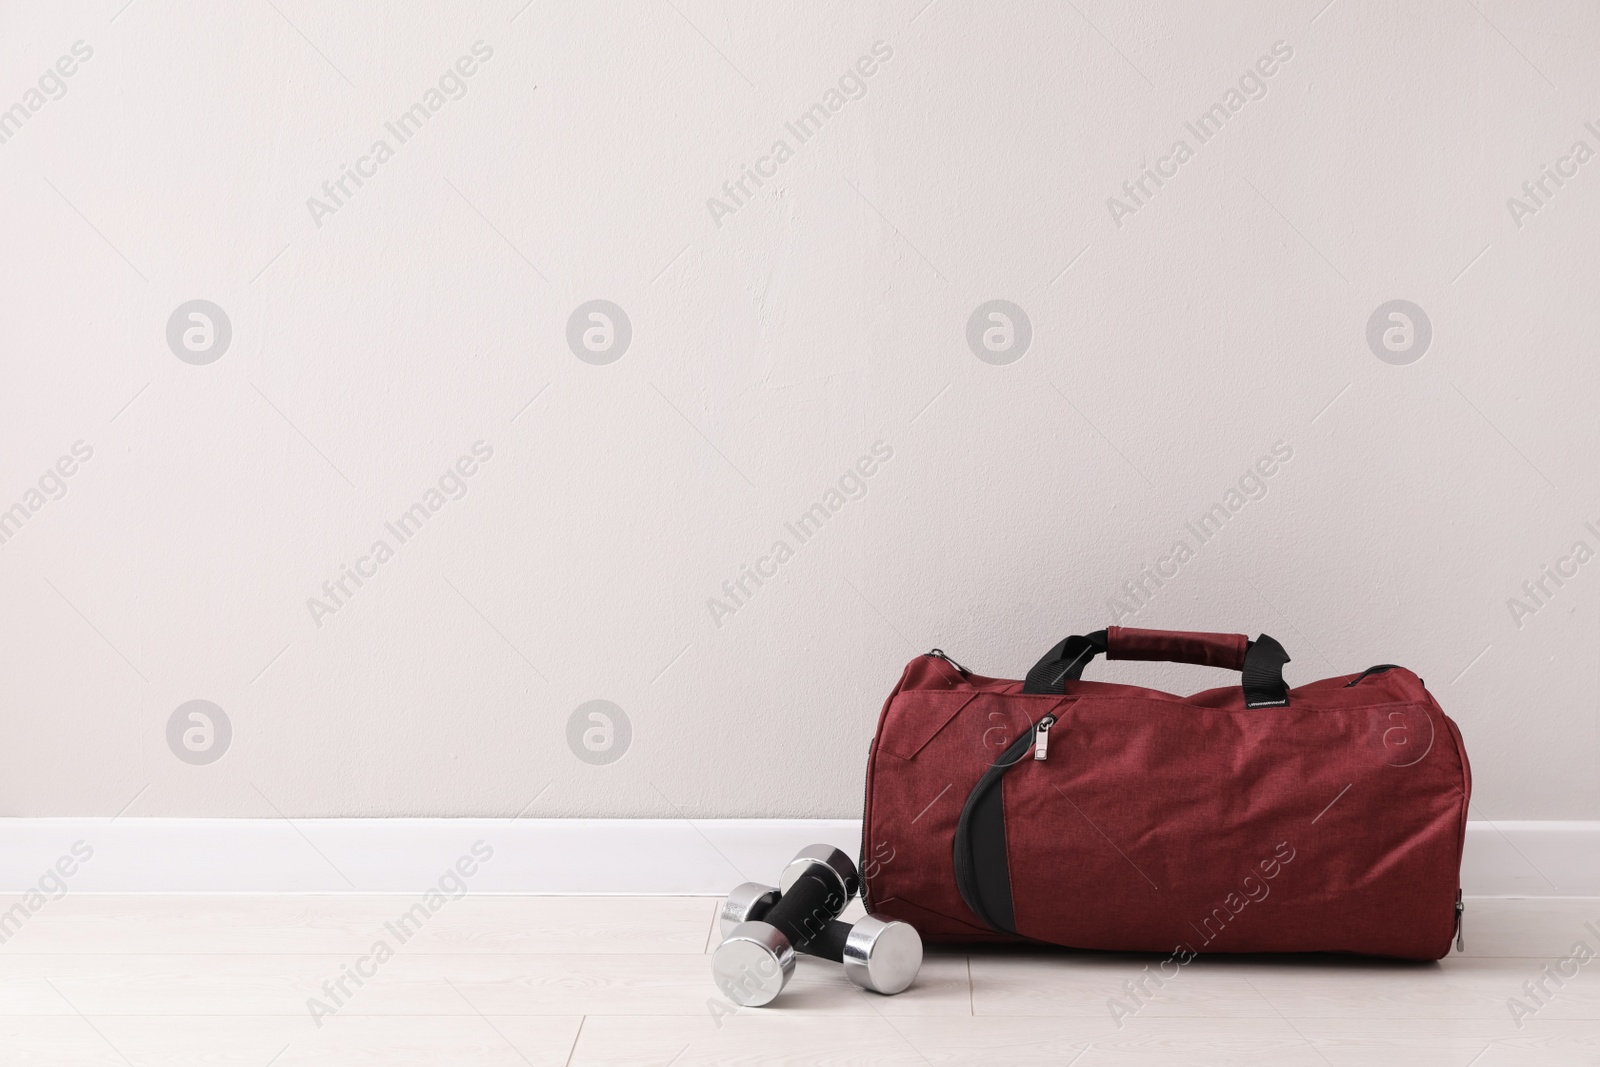 Photo of Red sports bag and dumbbells on floor near light wall, space for text